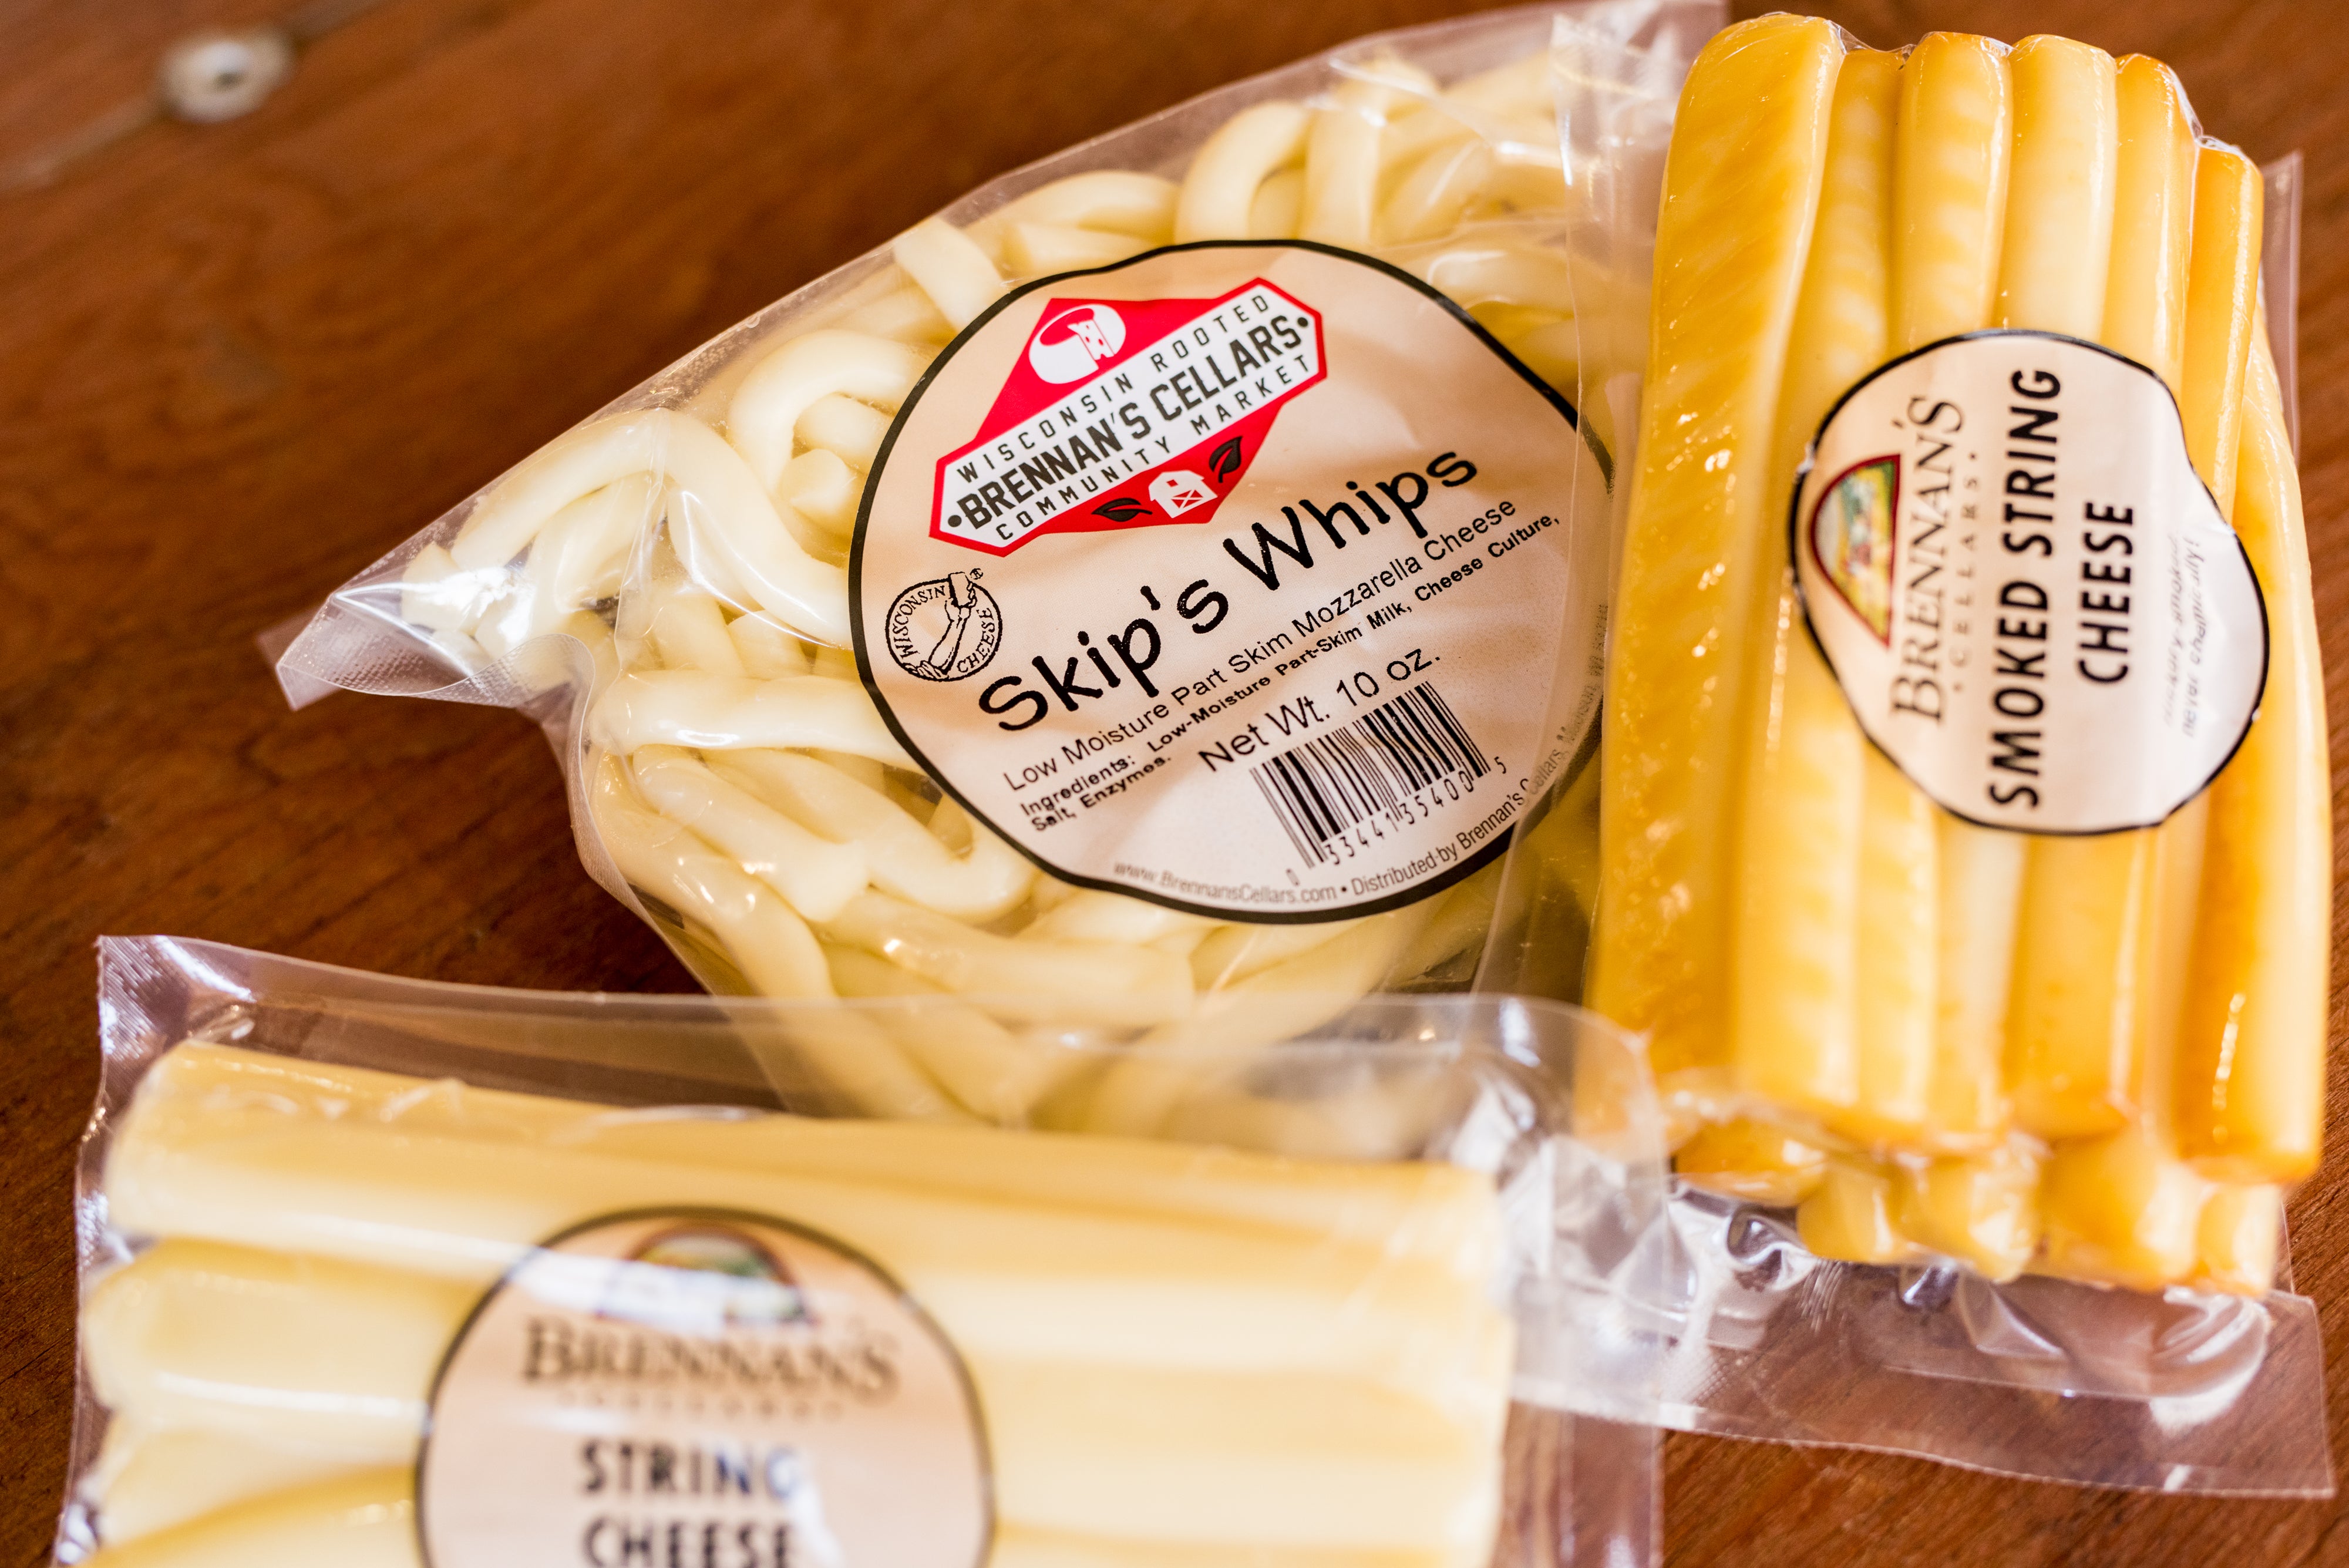 Buy Smoked Wisconsin String Cheese Online